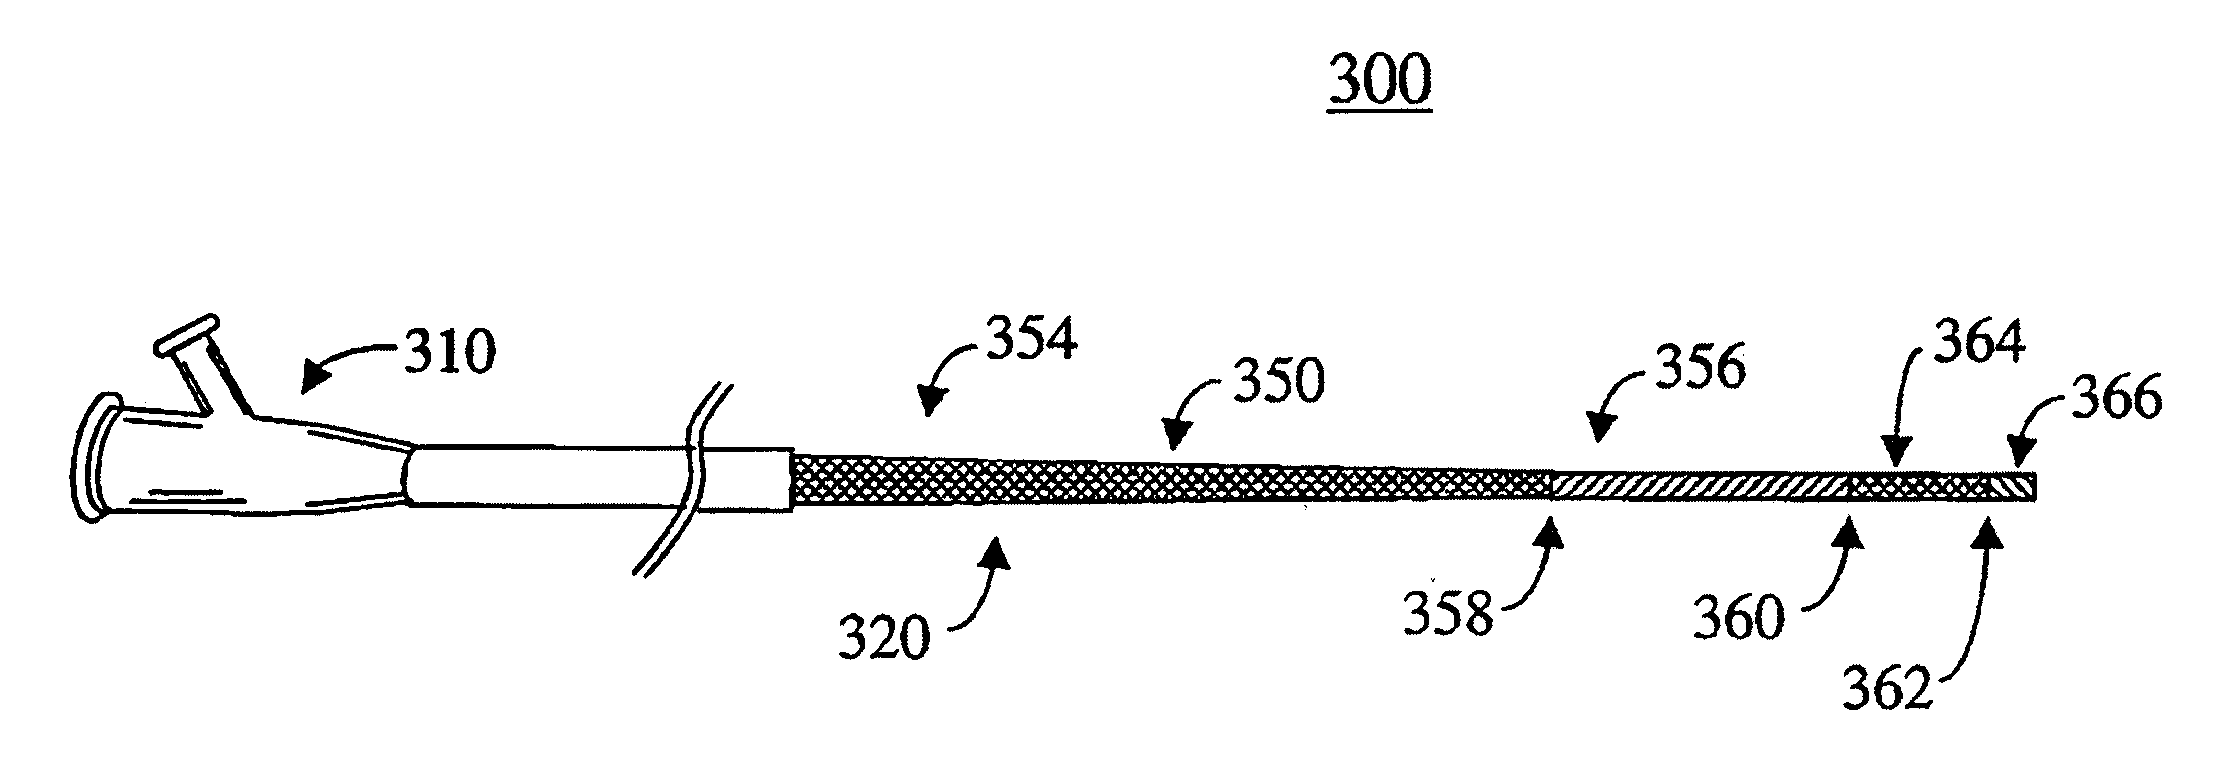 Catheter With Reinforcing Layer Having Variable Strand Construction